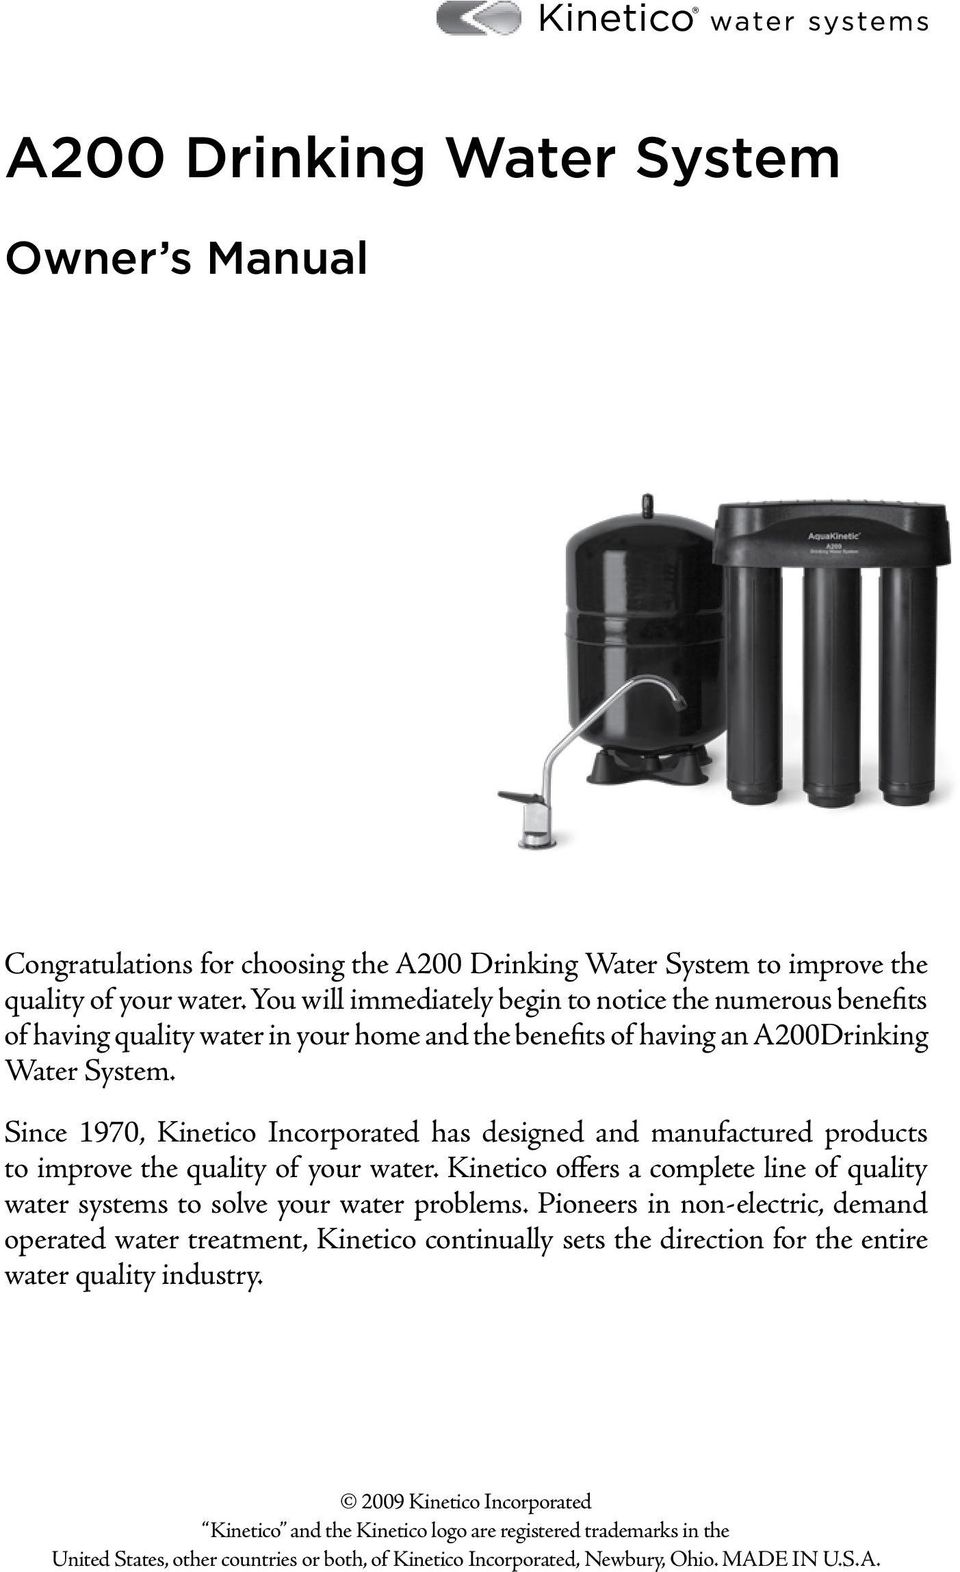 Since 1970, Kinetico Incorporated has designed and manufactured products to improve the quality of your water. Kinetico offers a complete line of quality water systems to solve your water problems.